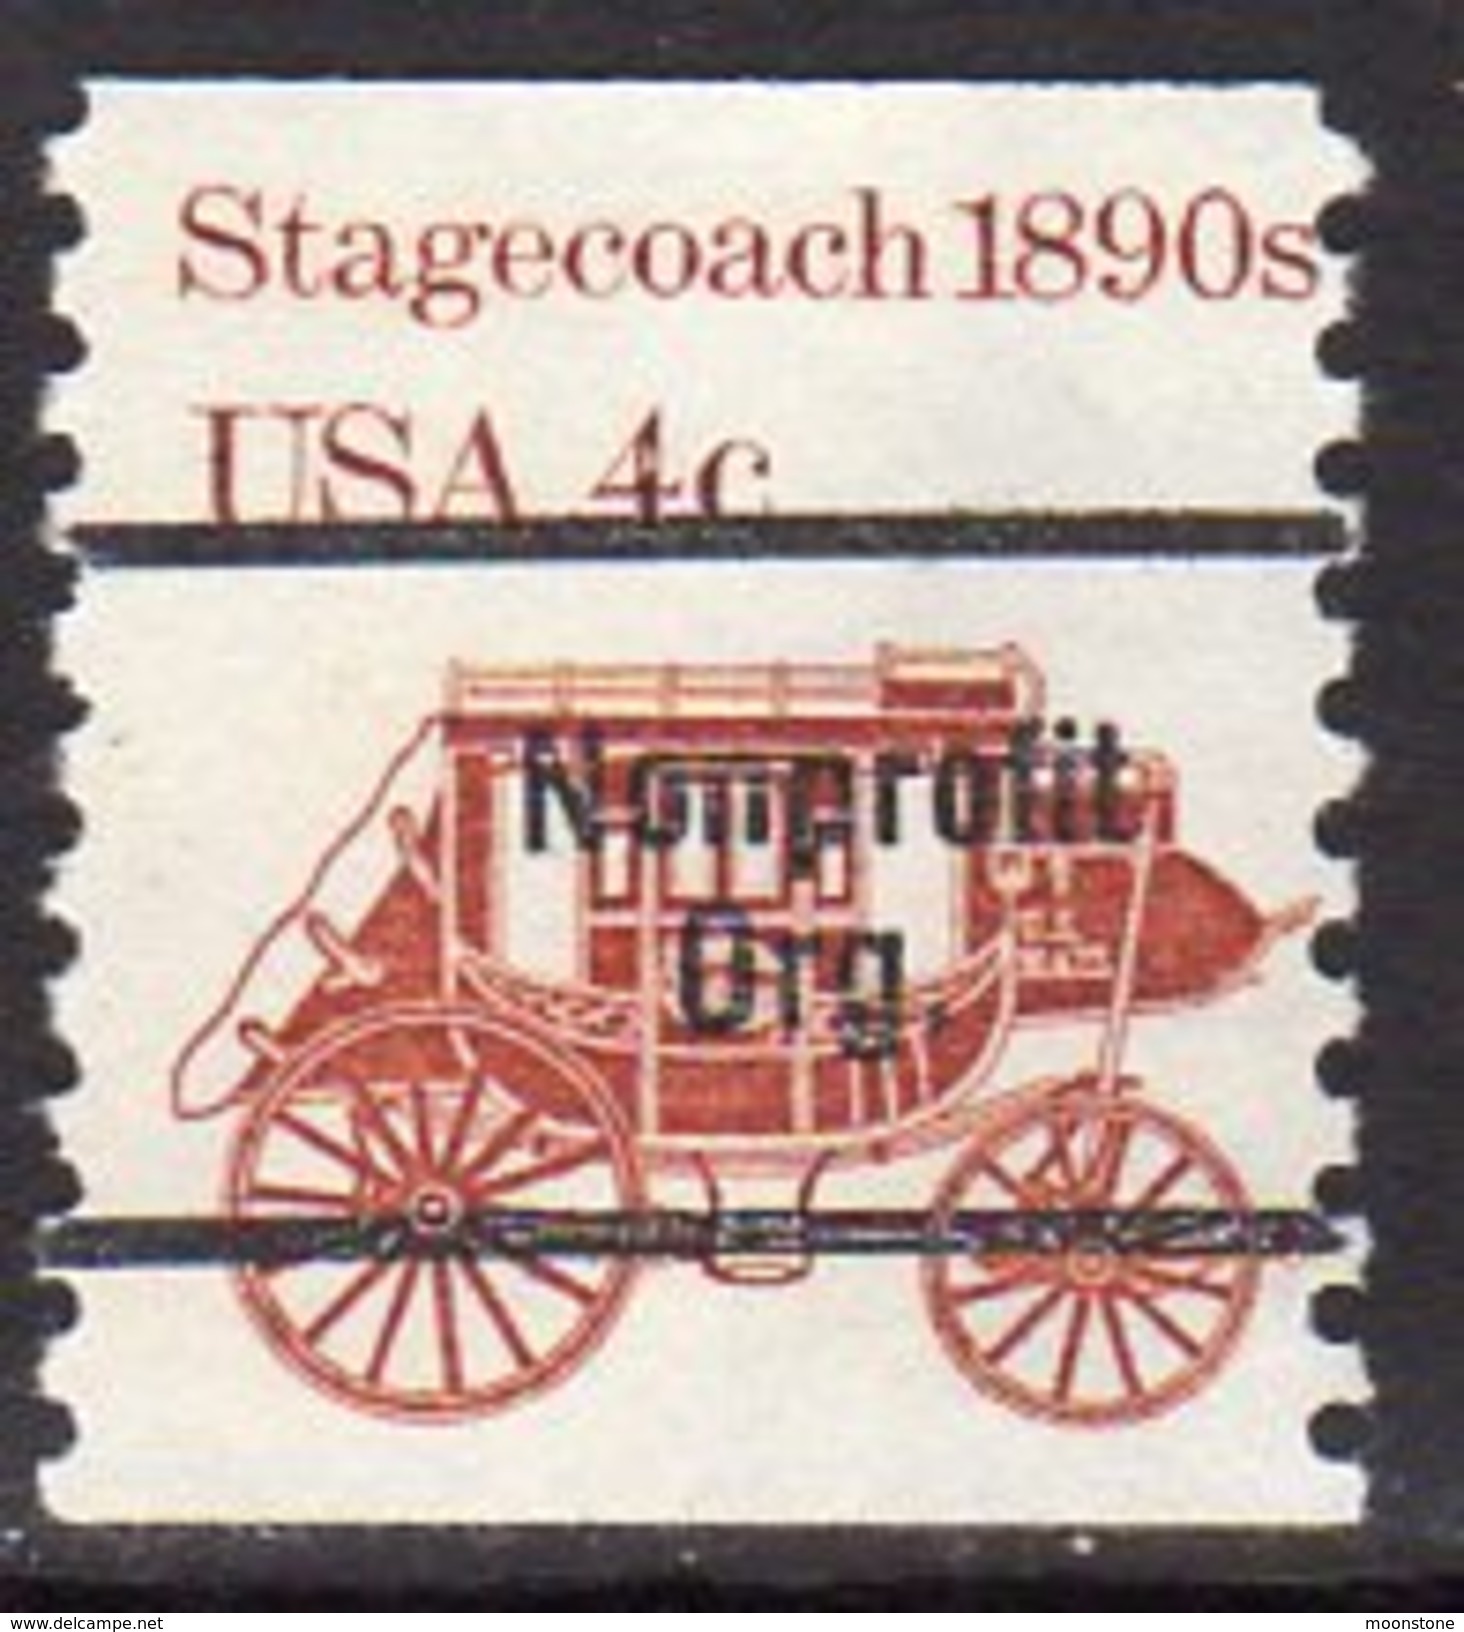 USA 1981 Transport Coil Stamps, 4c  Redrawn Stagecoach Presort, MNH (SG 1869b) - Unused Stamps